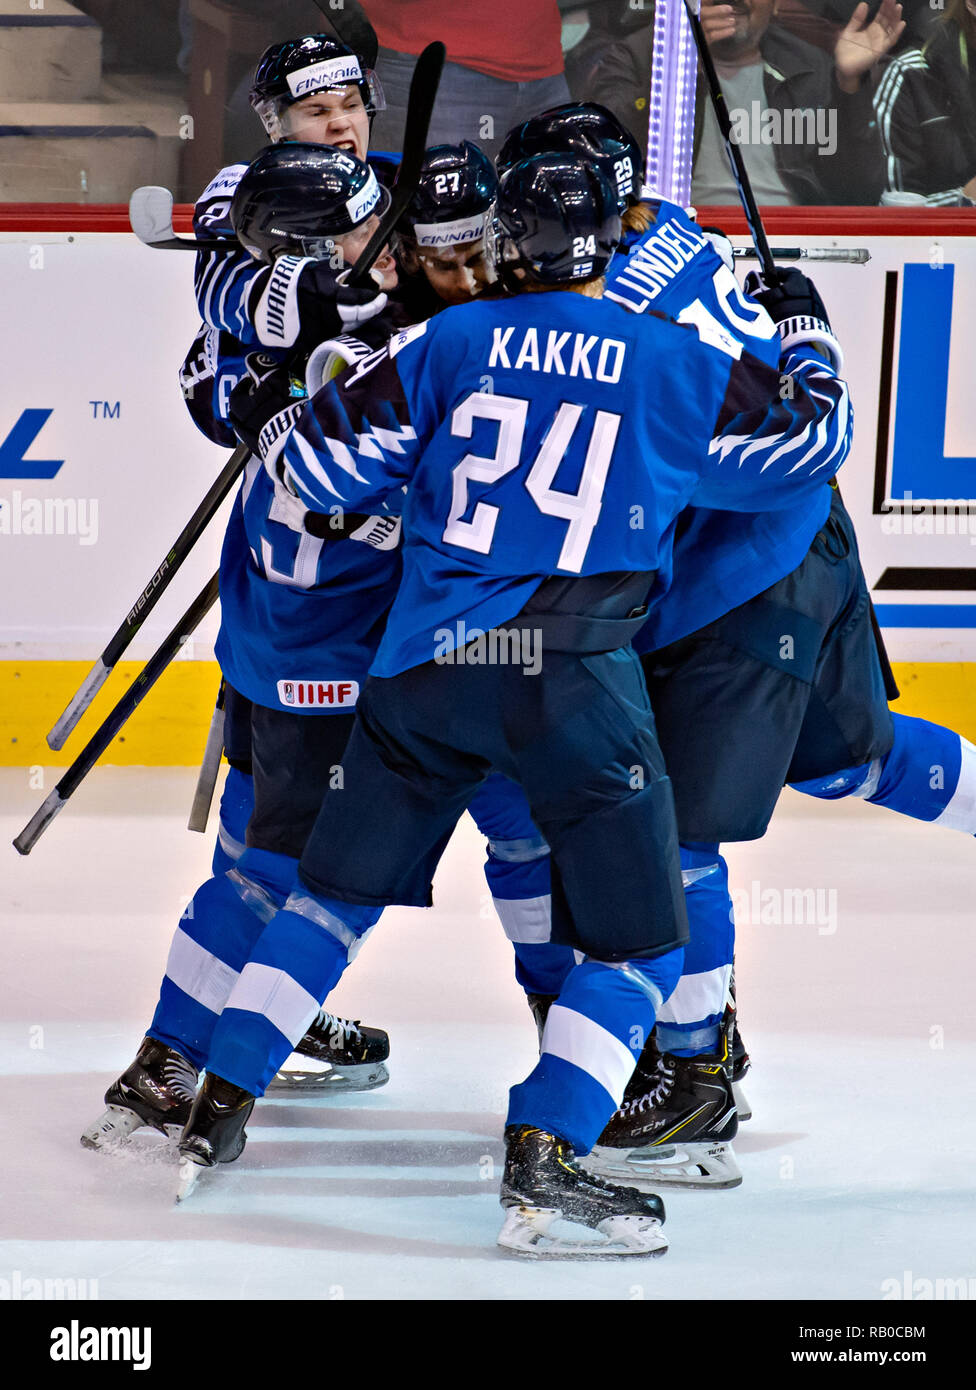 Vancouver. 6th Jan, 2019. Team Finland players celebrate their first goal during a match against USA at the IIHF World Junior Championships in Vancouver, Canada, January, 5, 2019. Credit: Andrew Soong/Xinhua/Alamy Live News Stock Photo